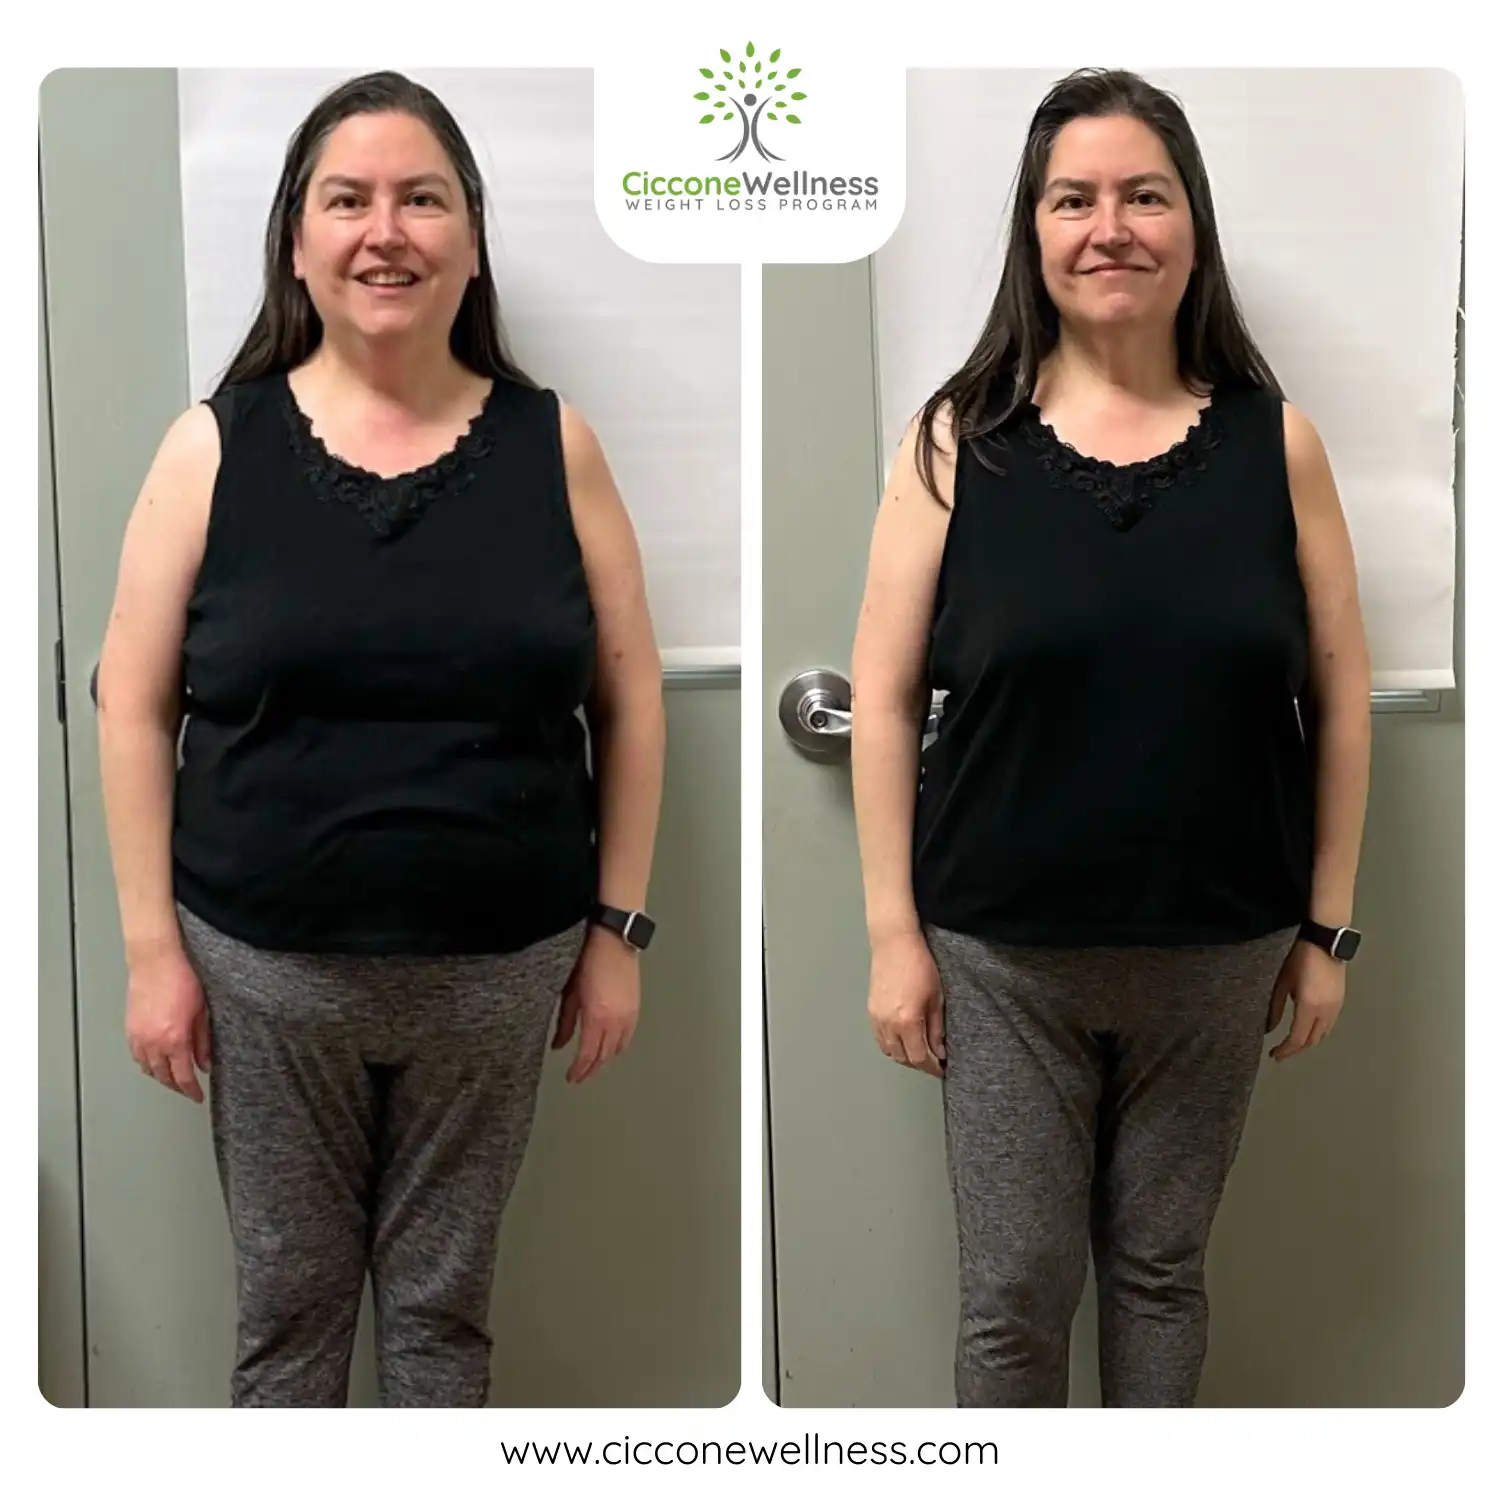 Zenaida before and after weight loss front view